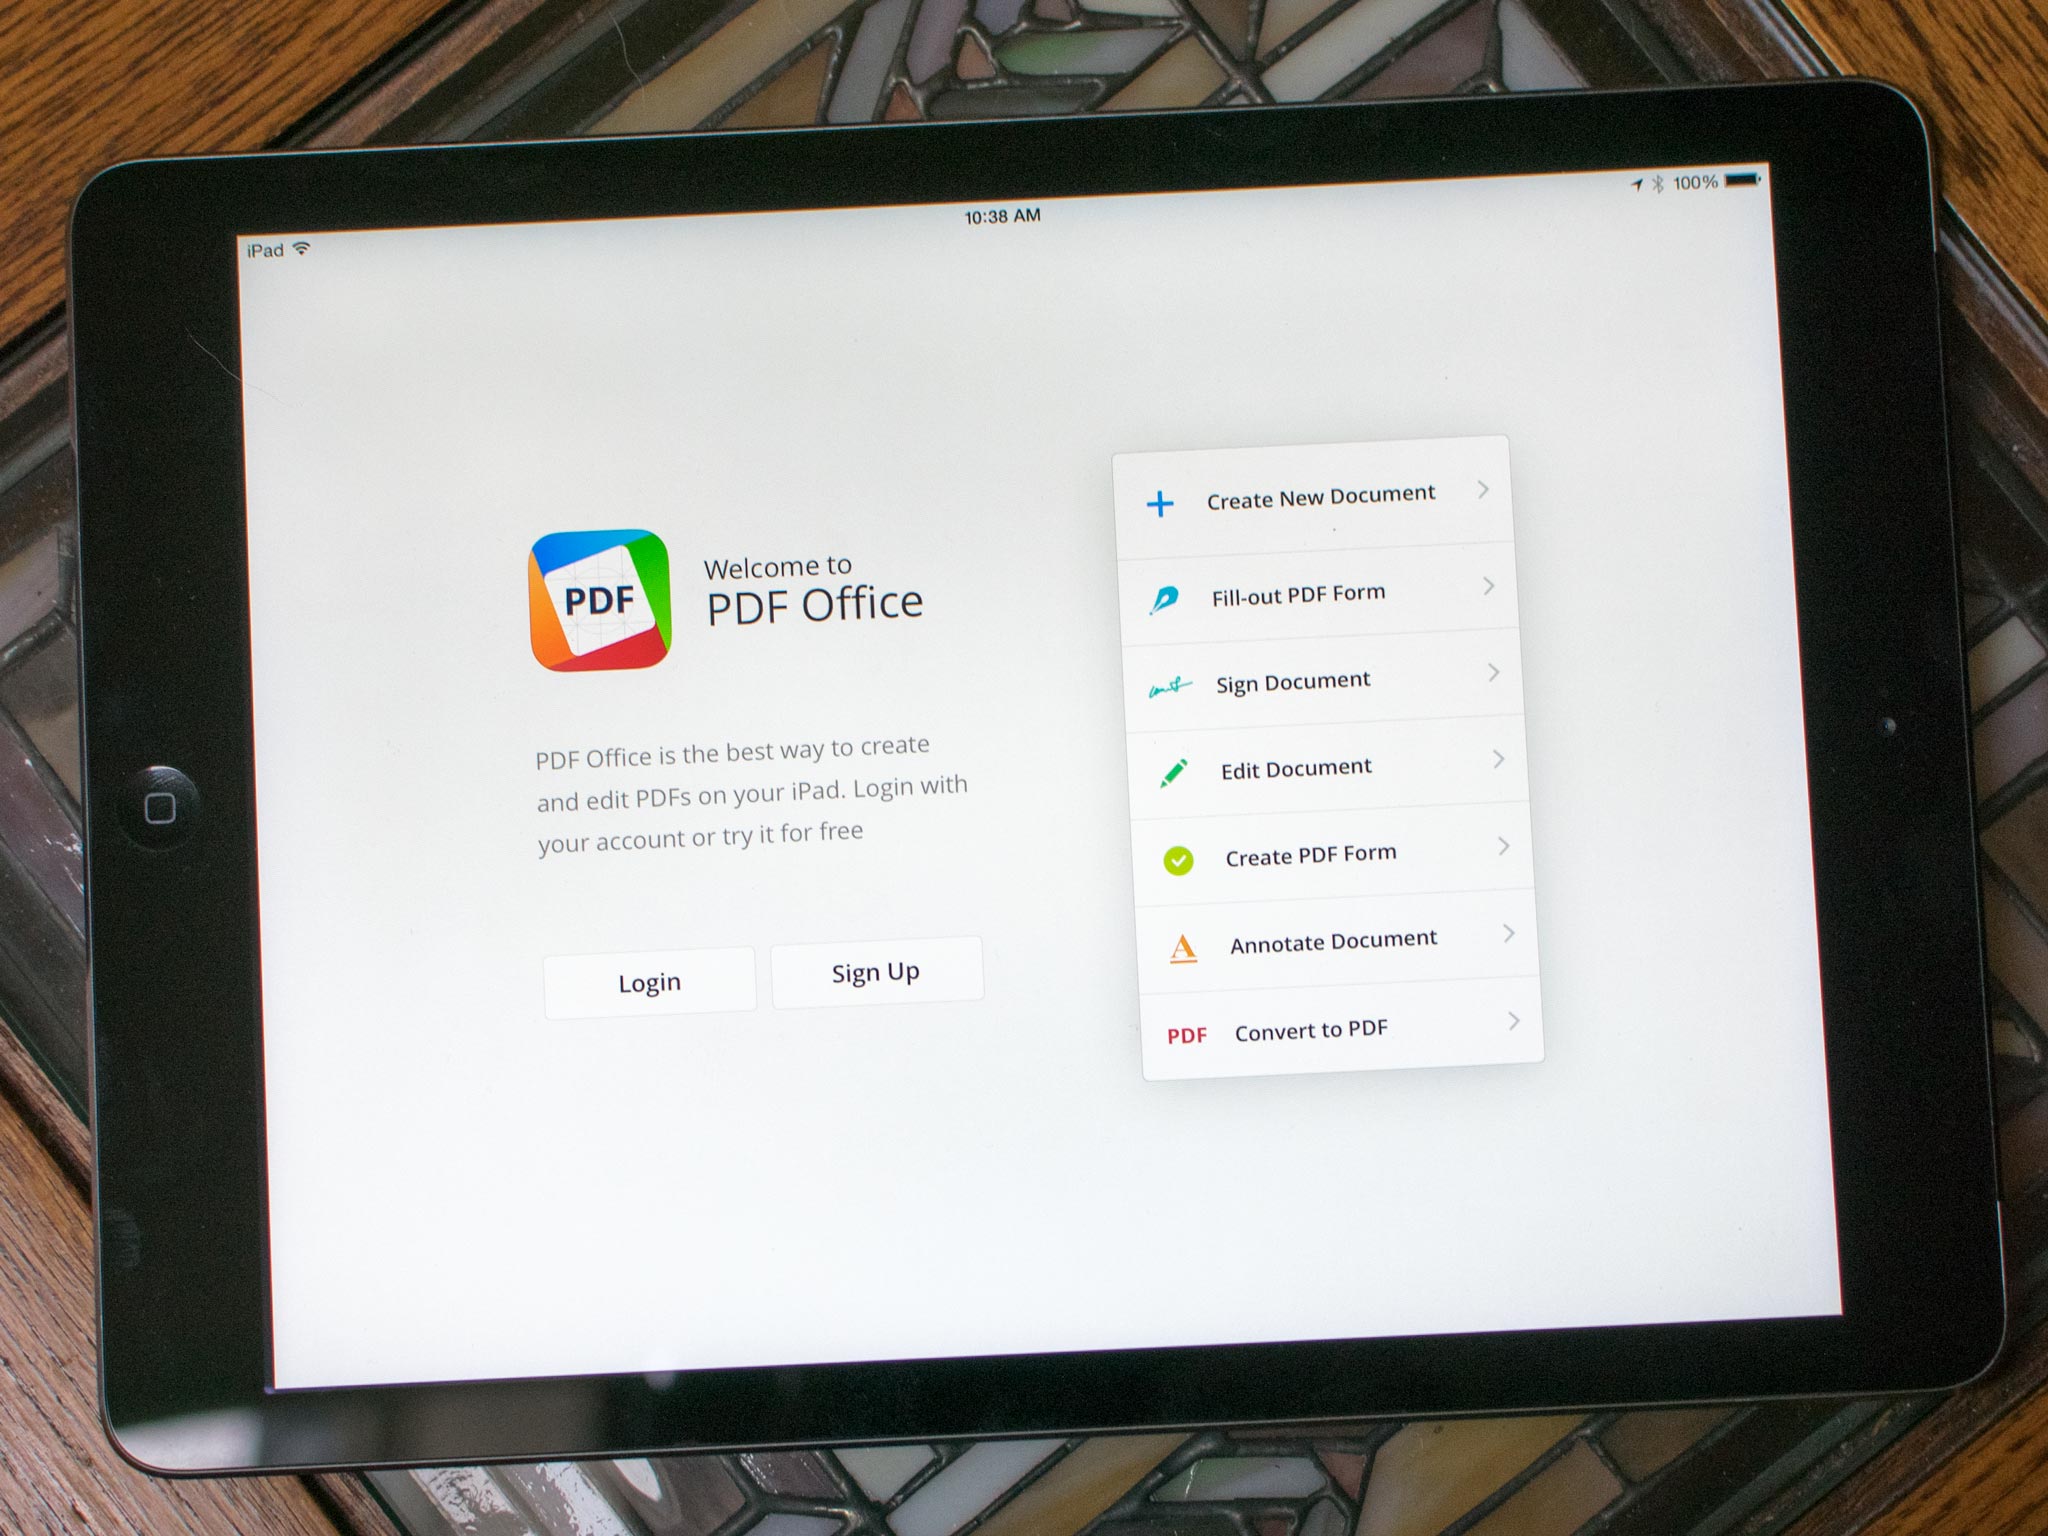 PDF Office for iPad puts powerful document creation at your fingertips